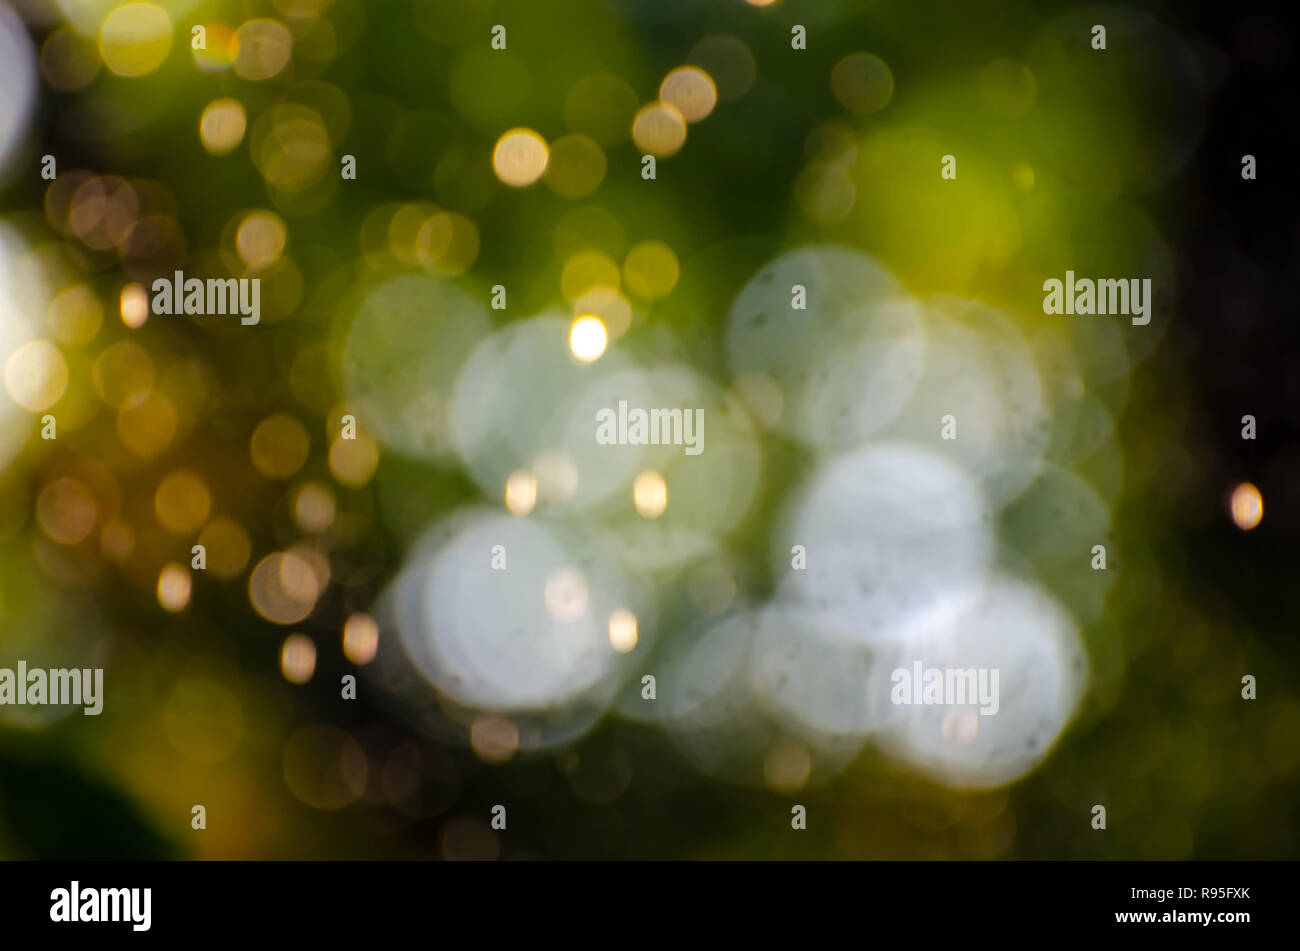 Abstract natural background of blurred leaves, soft focus bokeh lights and golden blurred water drops. Natural defocused light green background perfec Stock Photo